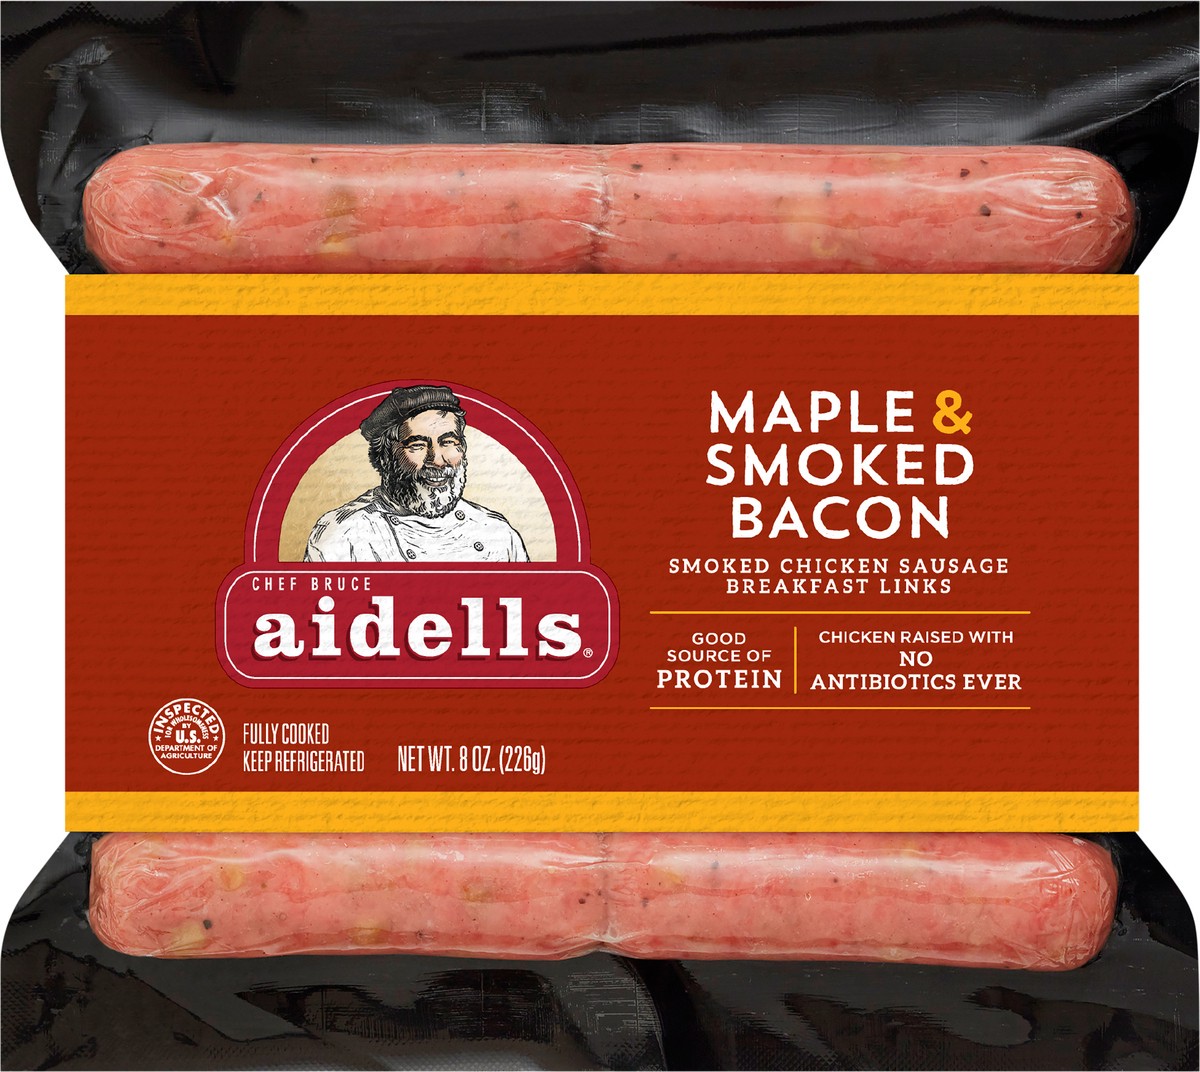 slide 3 of 6, Aidells Smoked Chicken Sausage Breakfast Links, Maple & Smoked Bacon, 8 oz. (10 Fully Cooked Links), 10 ct; 8 oz